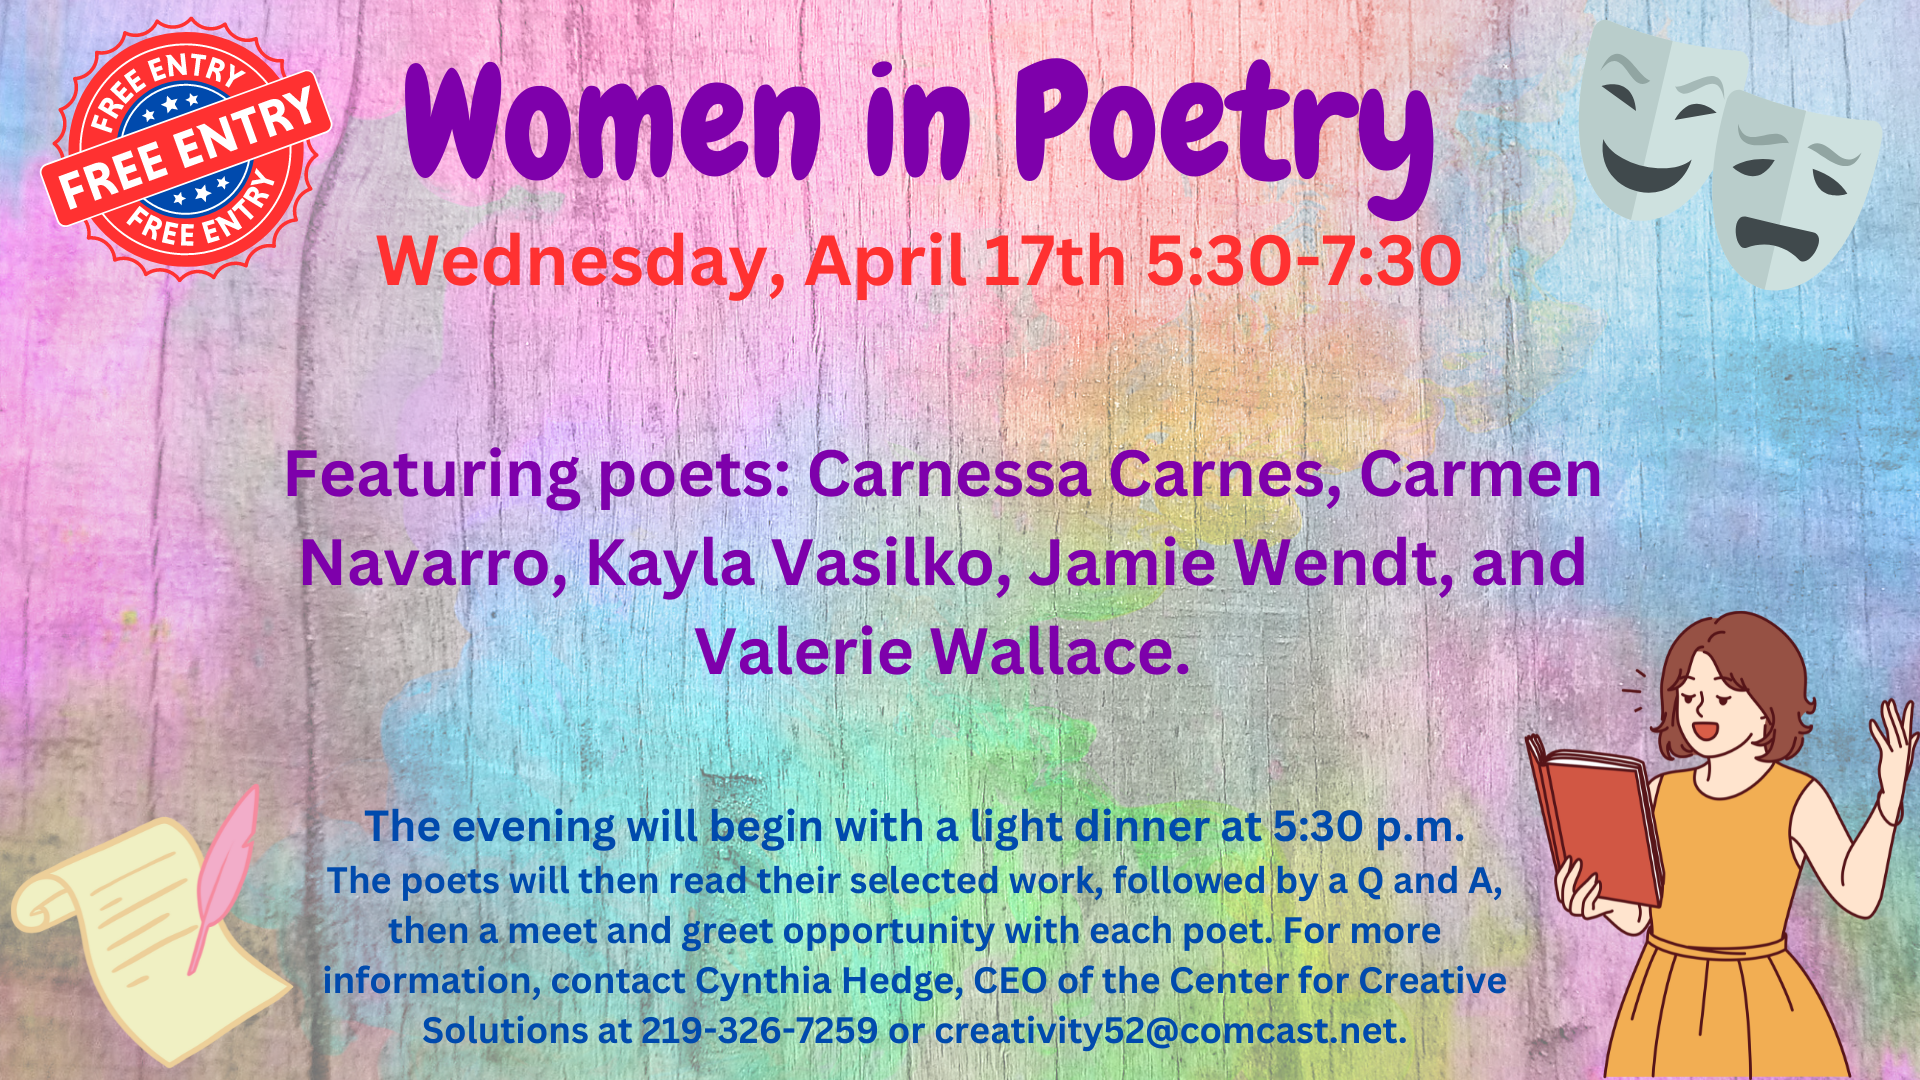 Women in Poetry event, Wednesday, April 17 at 5:30 pm